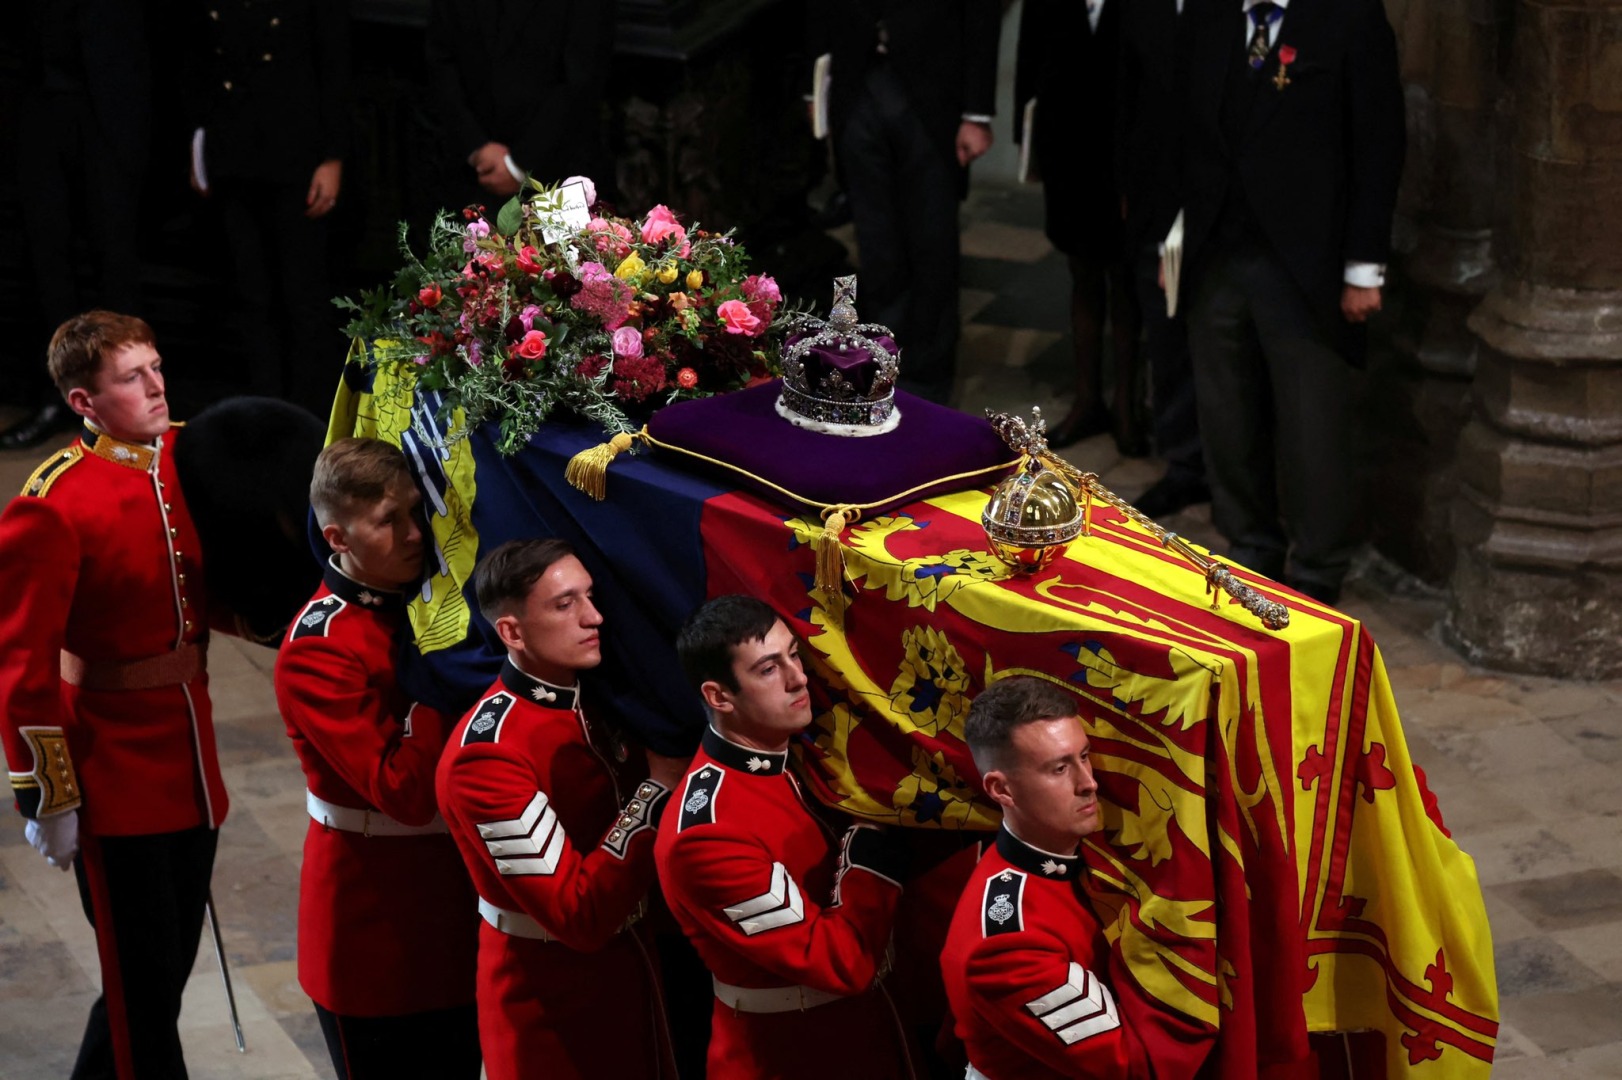 Queen Elizabeth II’s State Funeral Takes Place at Westminster Abbey in London